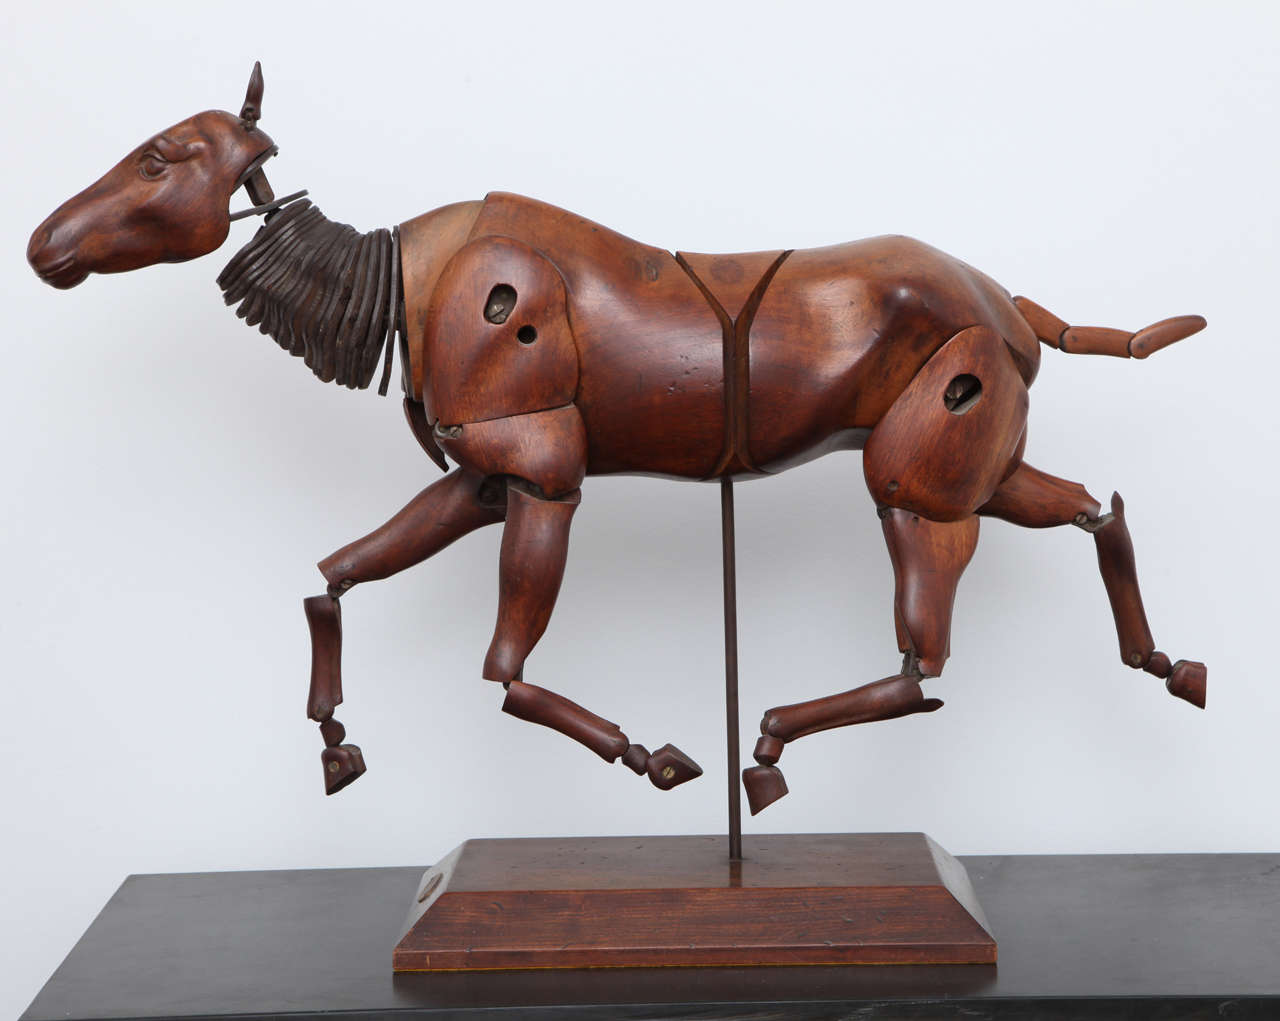 A 19th century French walnut and leather artist's model of a fully articulated horse on a wood base with a brass placque inscribed 